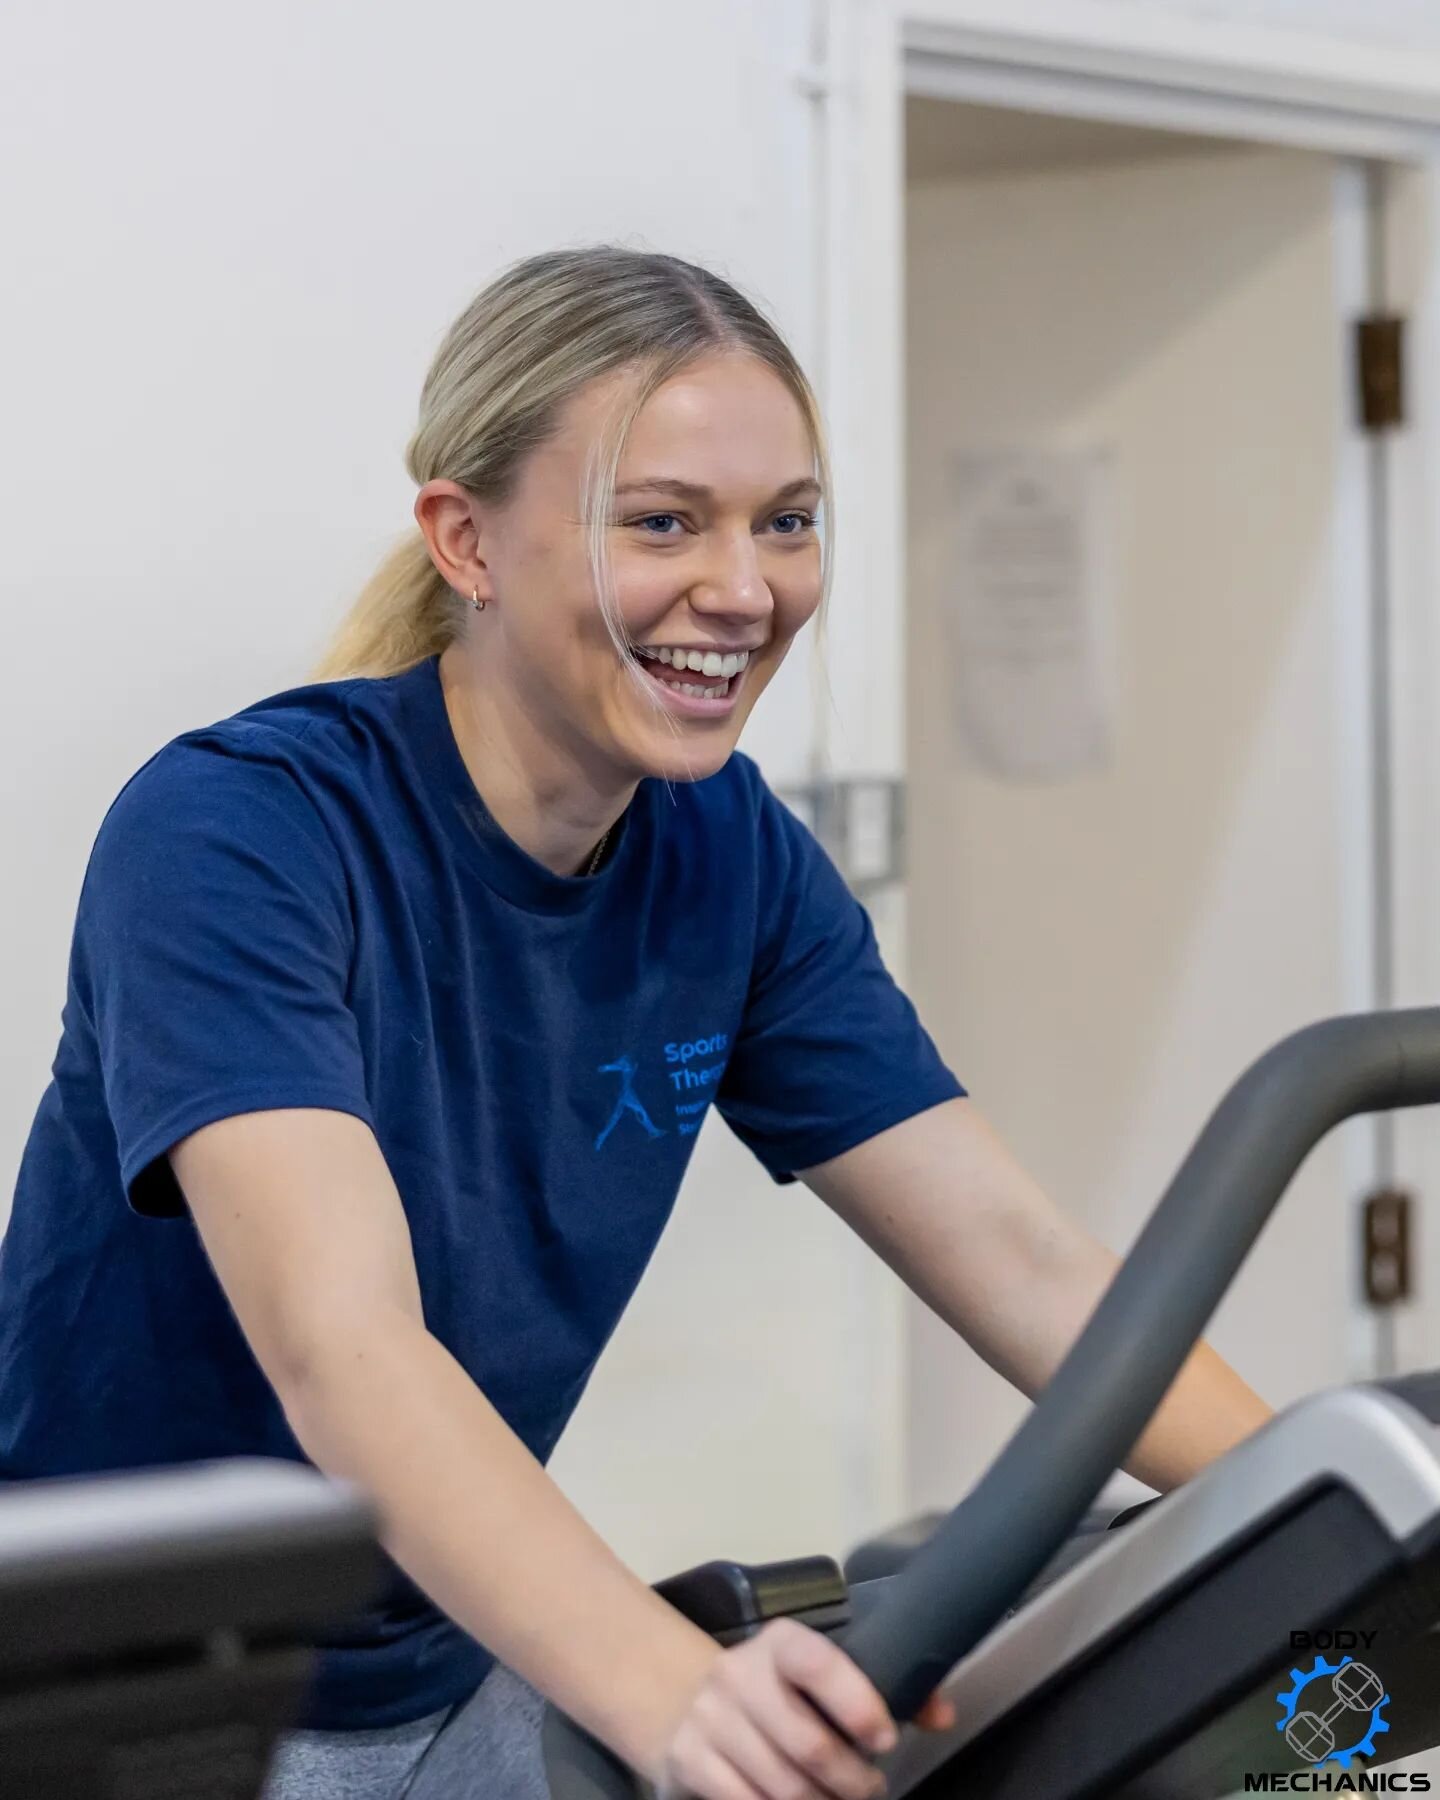 Our gym is open from 7am tomorrow morning! See you there! 

🦾🦾🦾
#BodyMechanicsBridgwater
.
.
.
. 
#bridgwater #gymlife #endorphins #gymmotivation #greatsmile #gymaddict #smile #happy #IMPACT20twenty